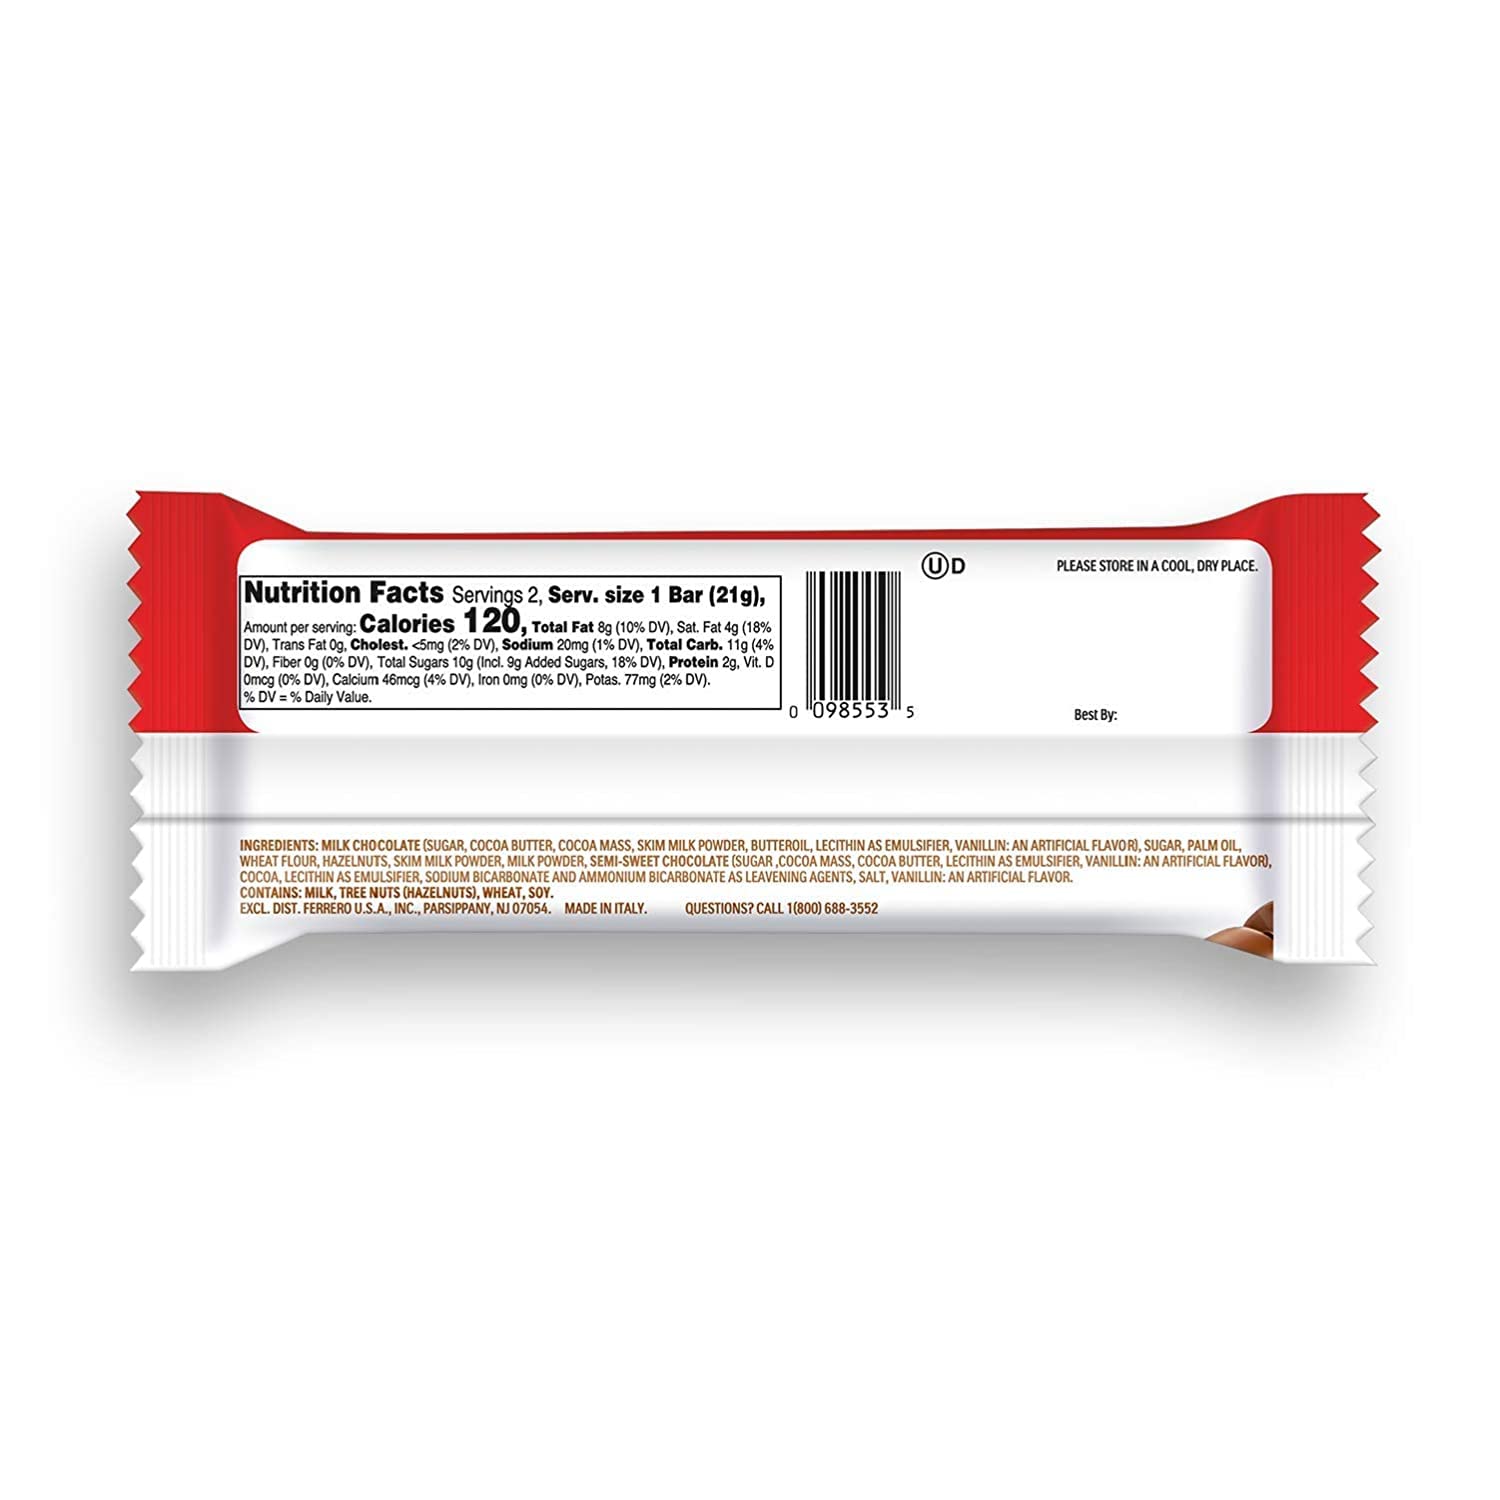 Kinder Bueno, Kinder Bueno White, Kinder Bueno Dark - Variety Combo - (6  packets - 12 pieces)